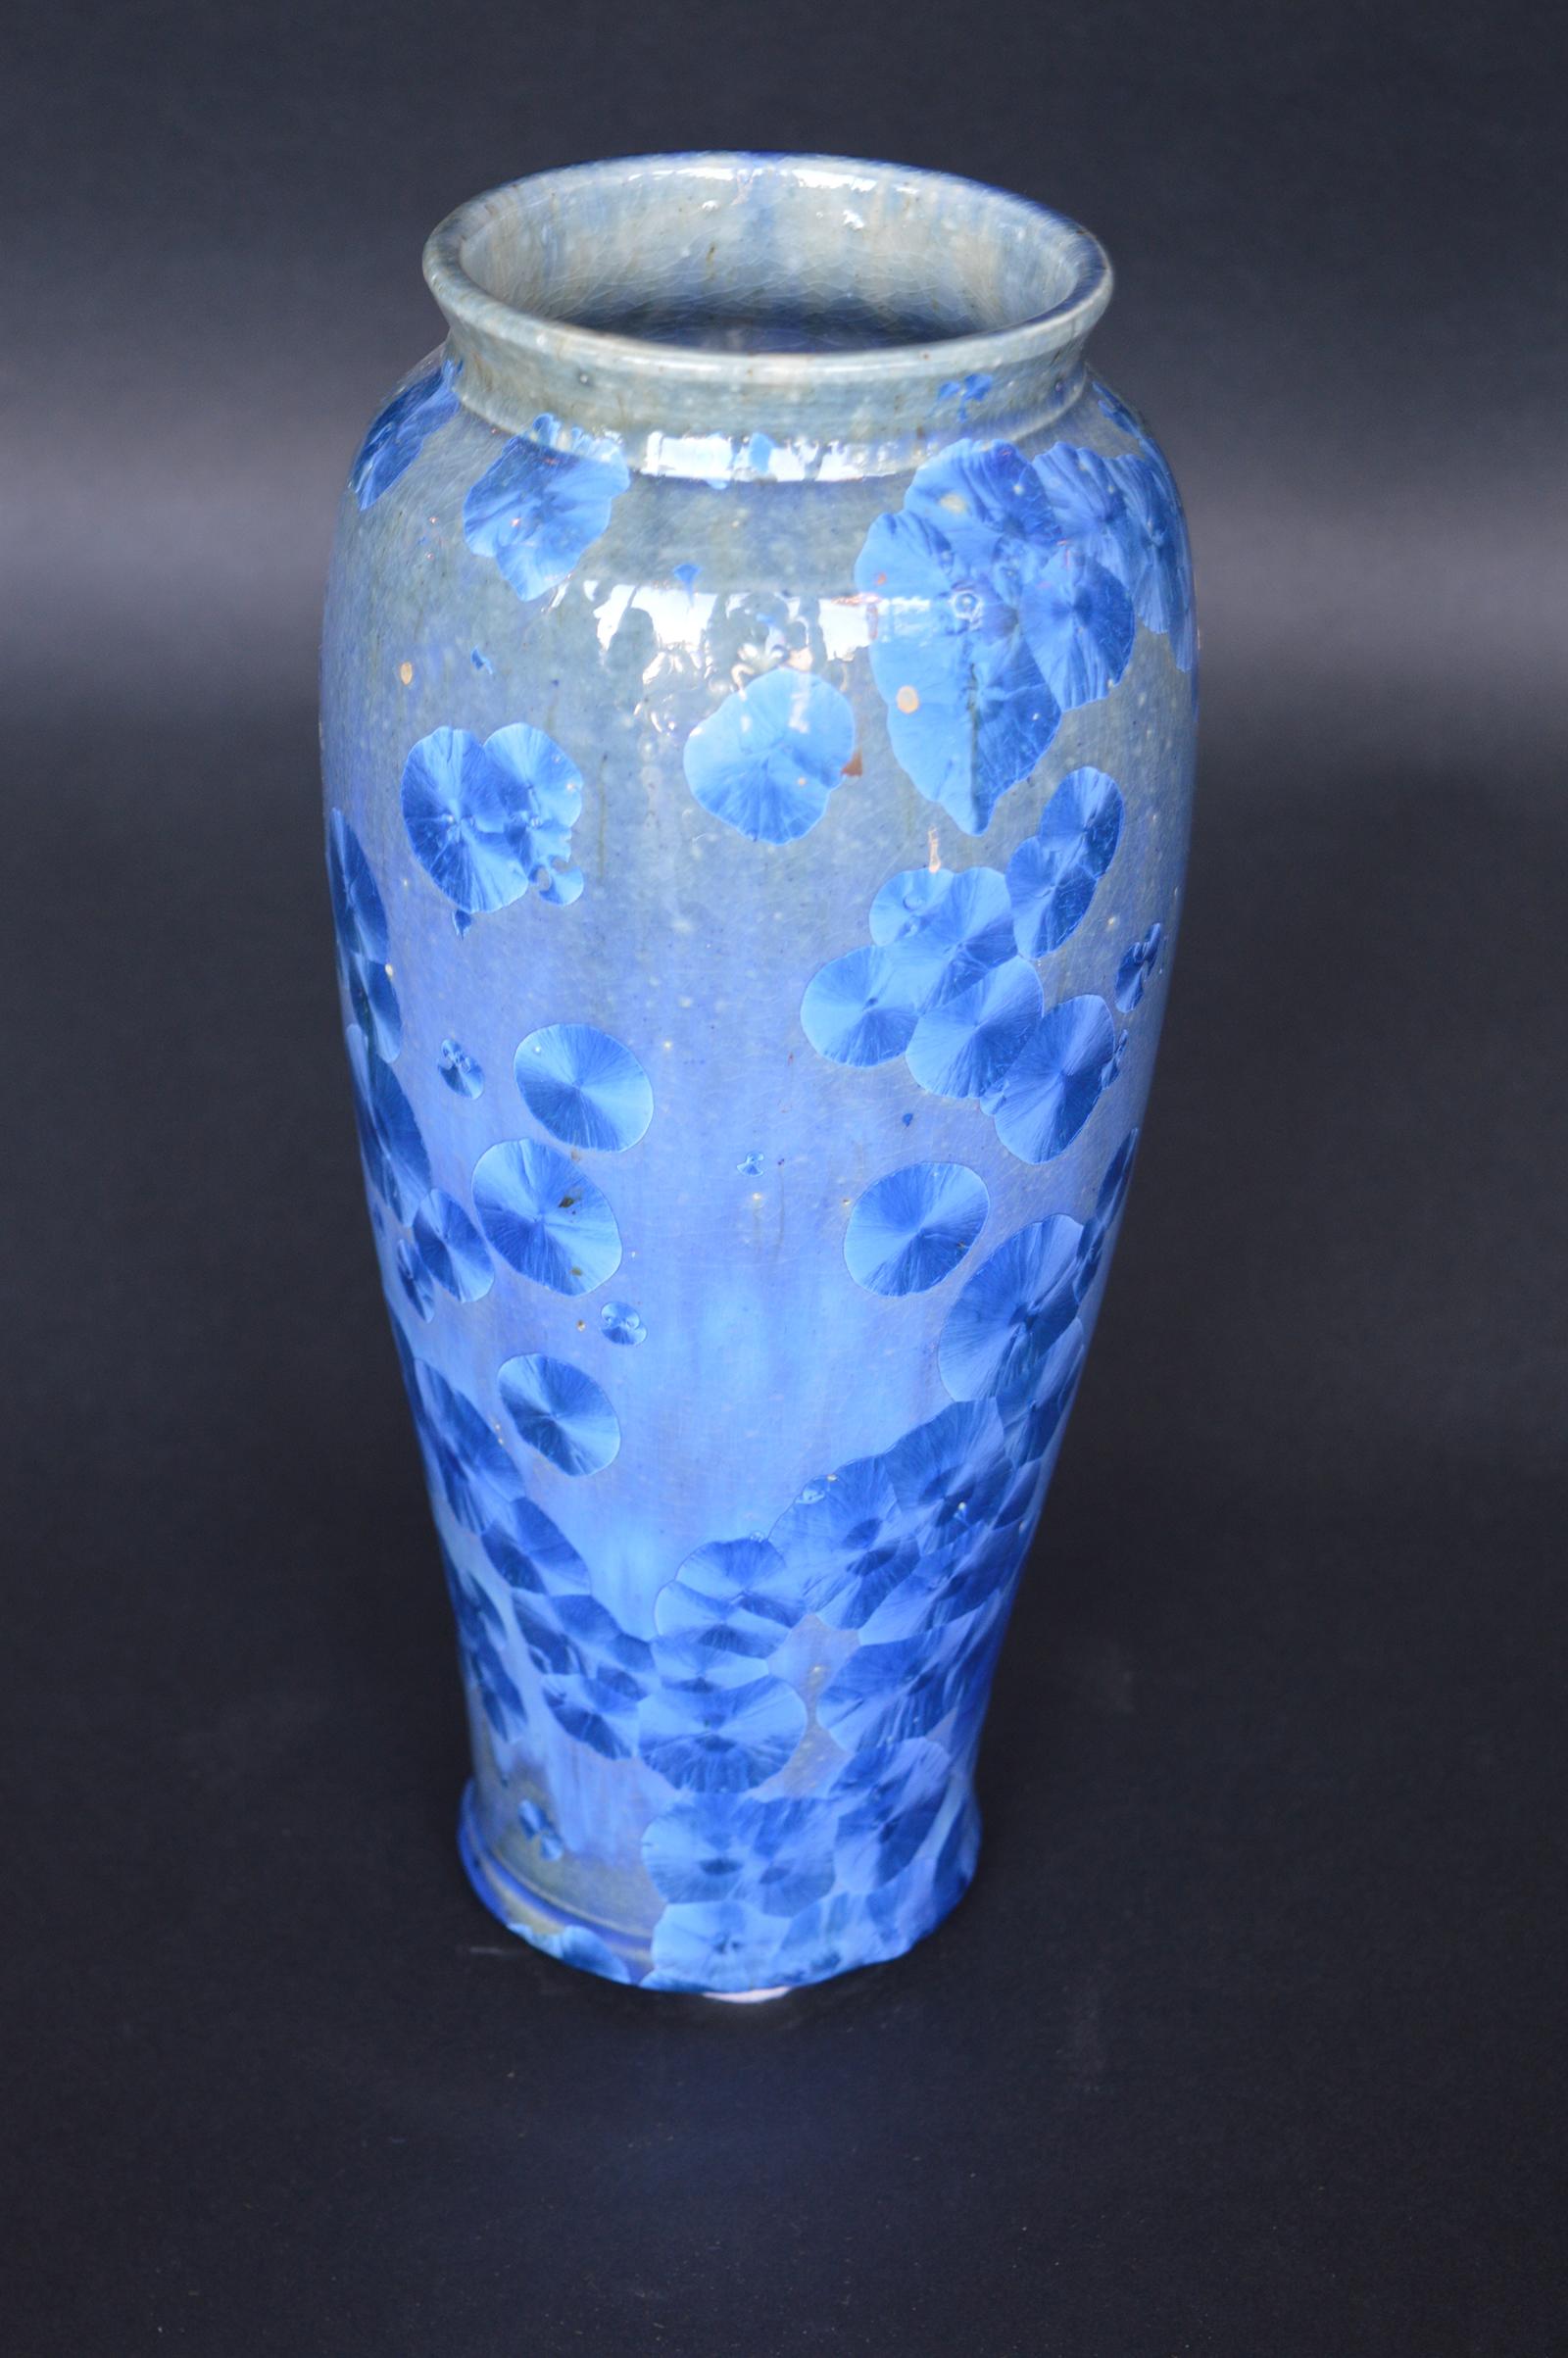 Collection of four ceramic vases. Made by artists based in Monte Rio California. Crystal Glaze is a High zinc and titanium glaze fired to 2300 degrees Farenheit. Then cooled to 2000 degrees and held for 4-6 hours during which crystals of Wilimite